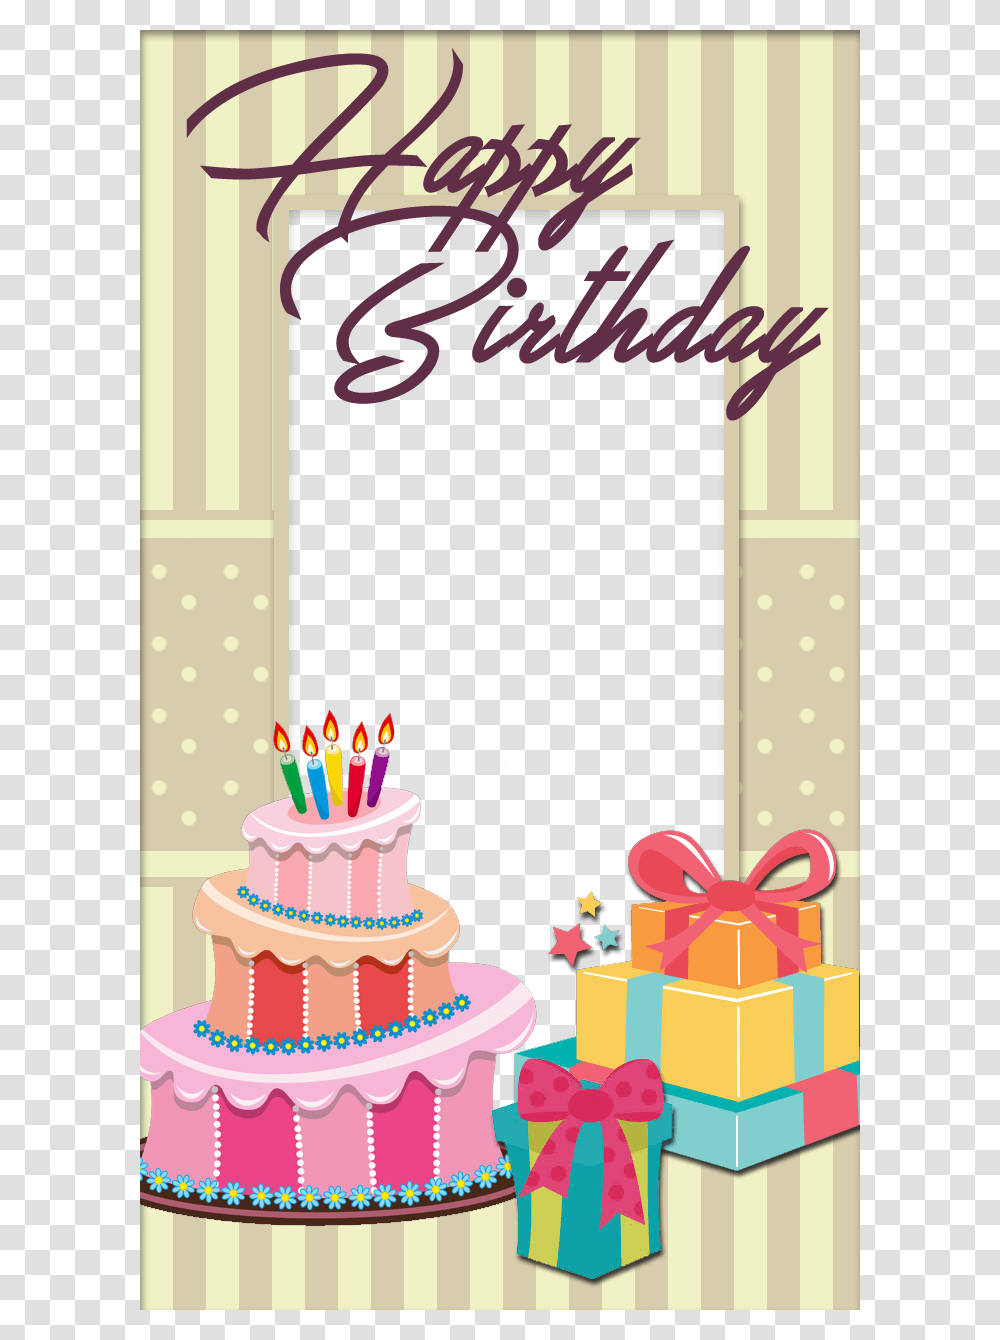 Pretty Birthday Frame With Cake And Gifts, Dessert, Food, Birthday Cake Transparent Png